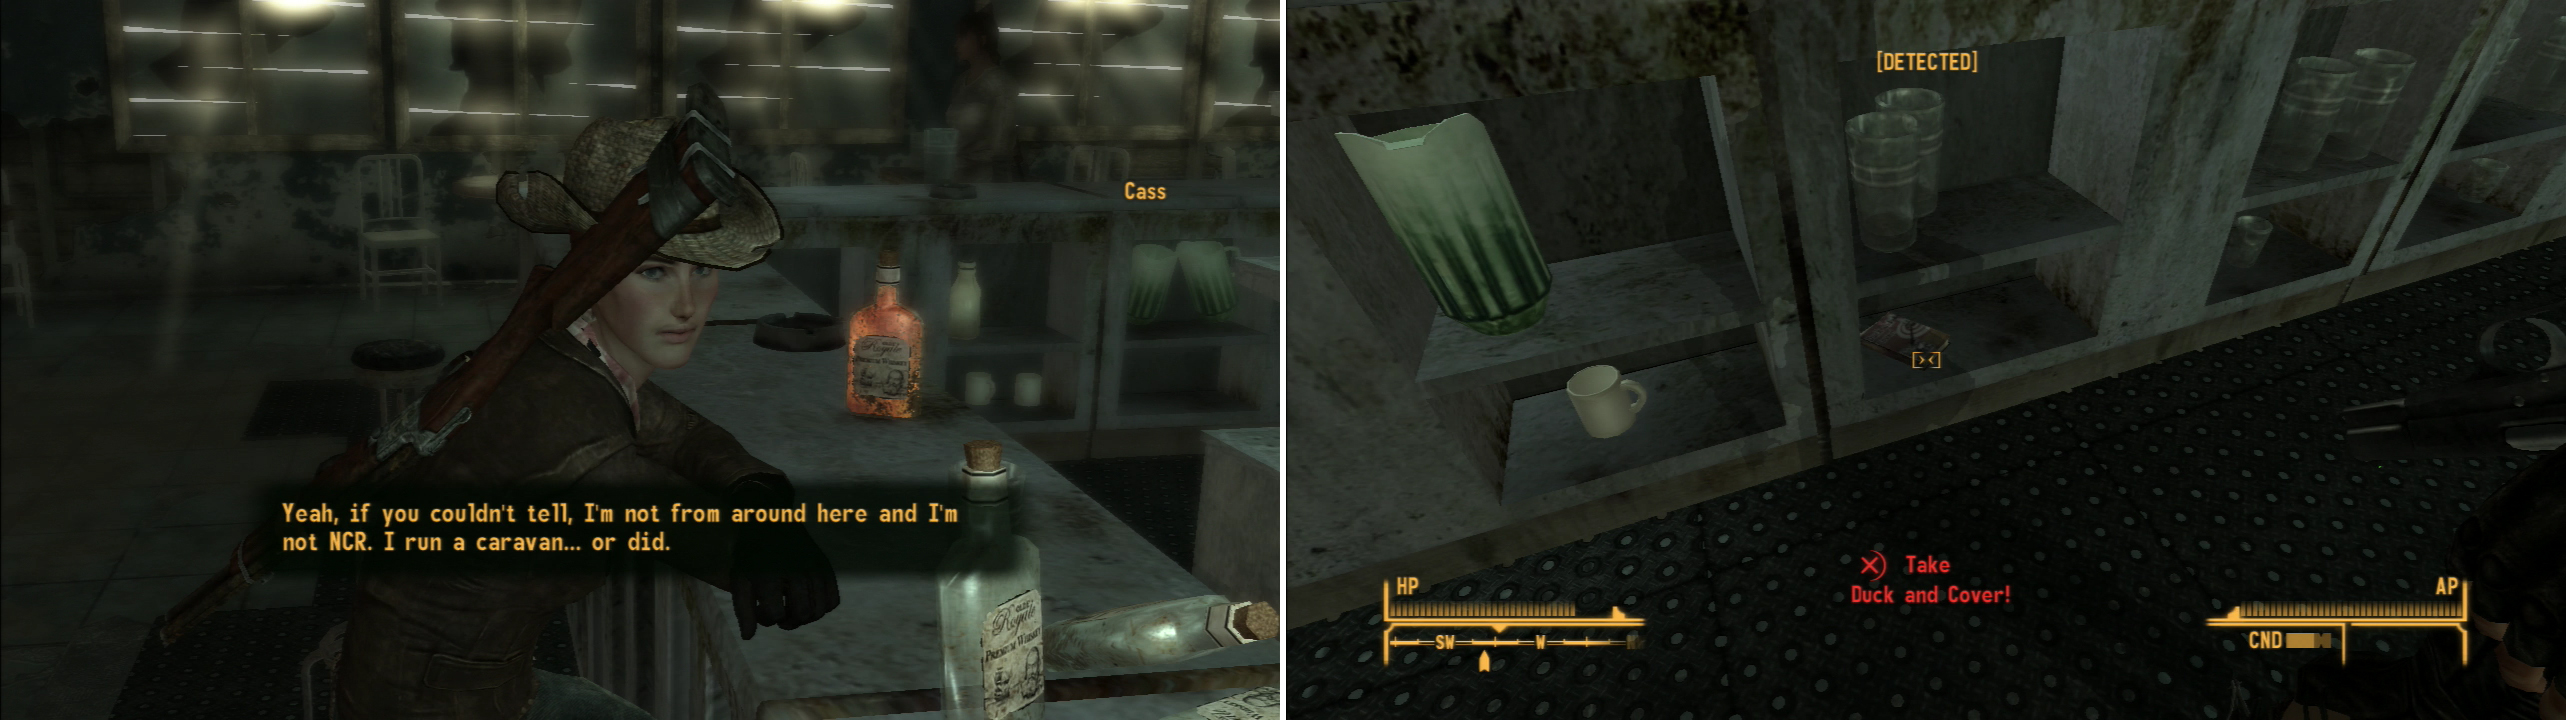 You can find Cass drinking away her troubles in the Mojave Outpost Barracks (left). More interestingly, however, is an issue of Duck and Cover! in a shelf under the bar (right).